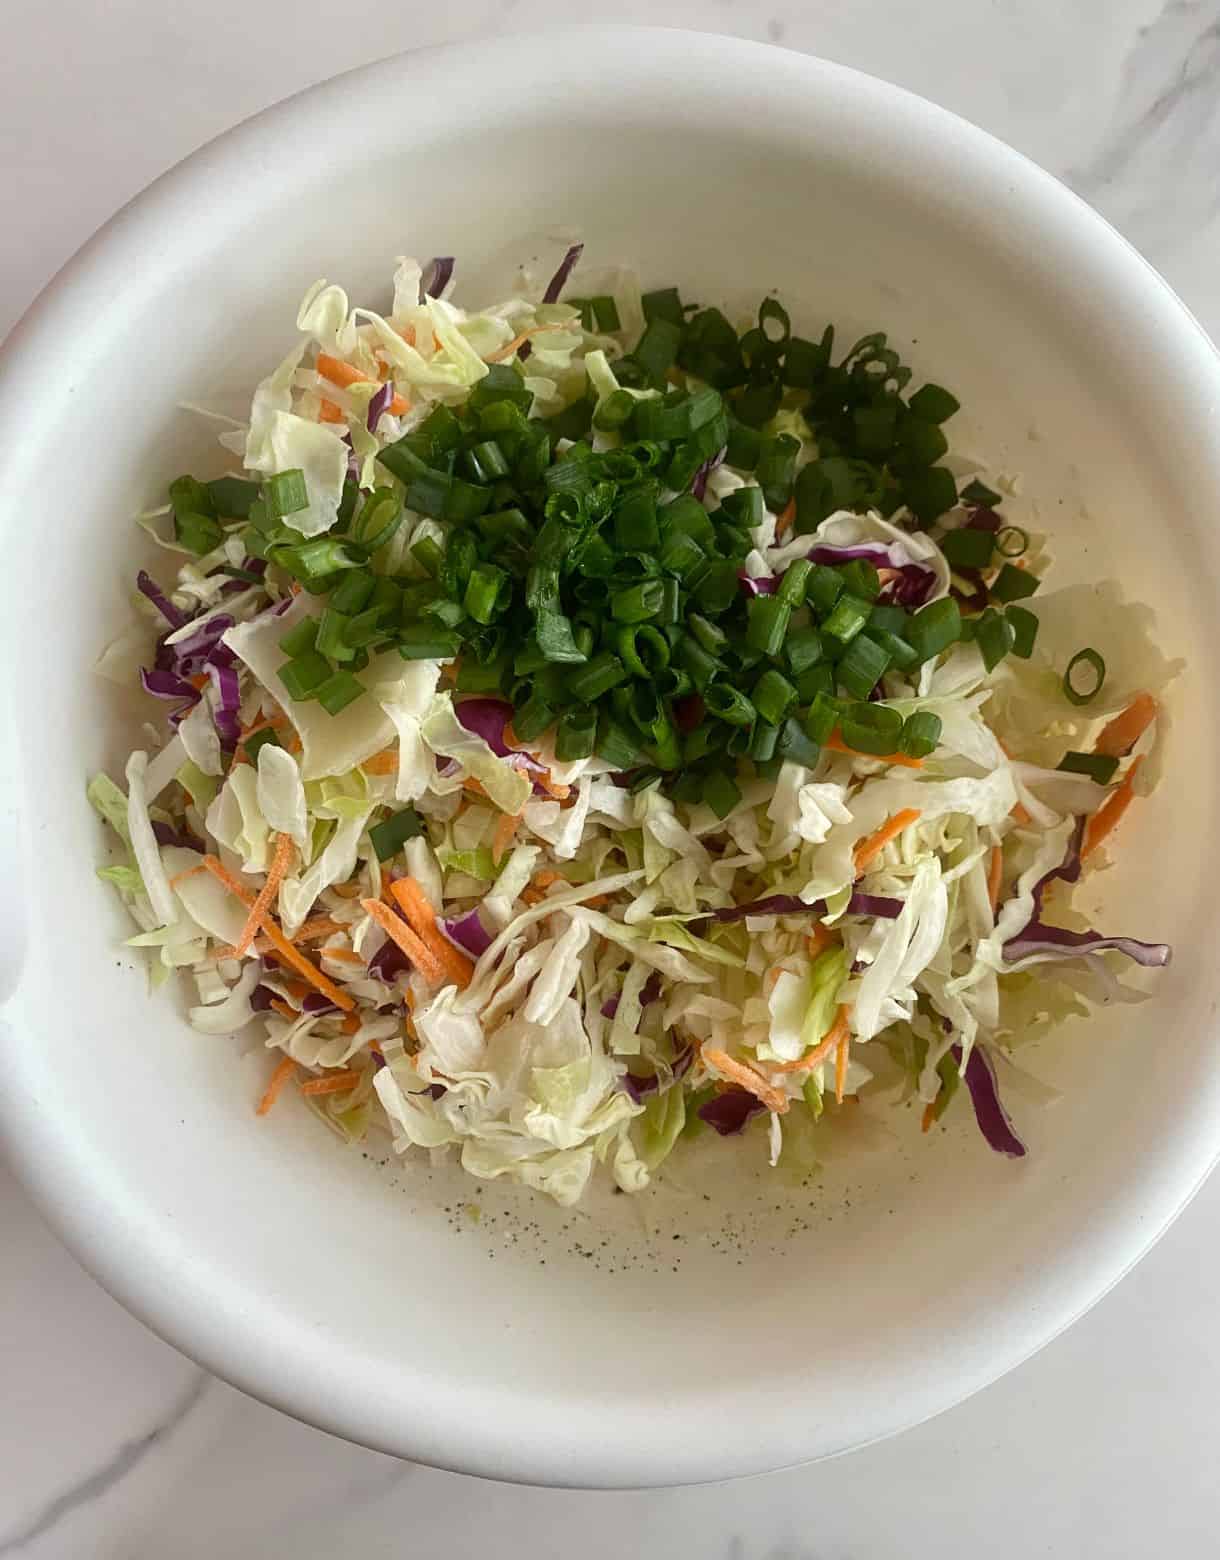 A bowls of shredded cabbage, carrots and sliced green onions.